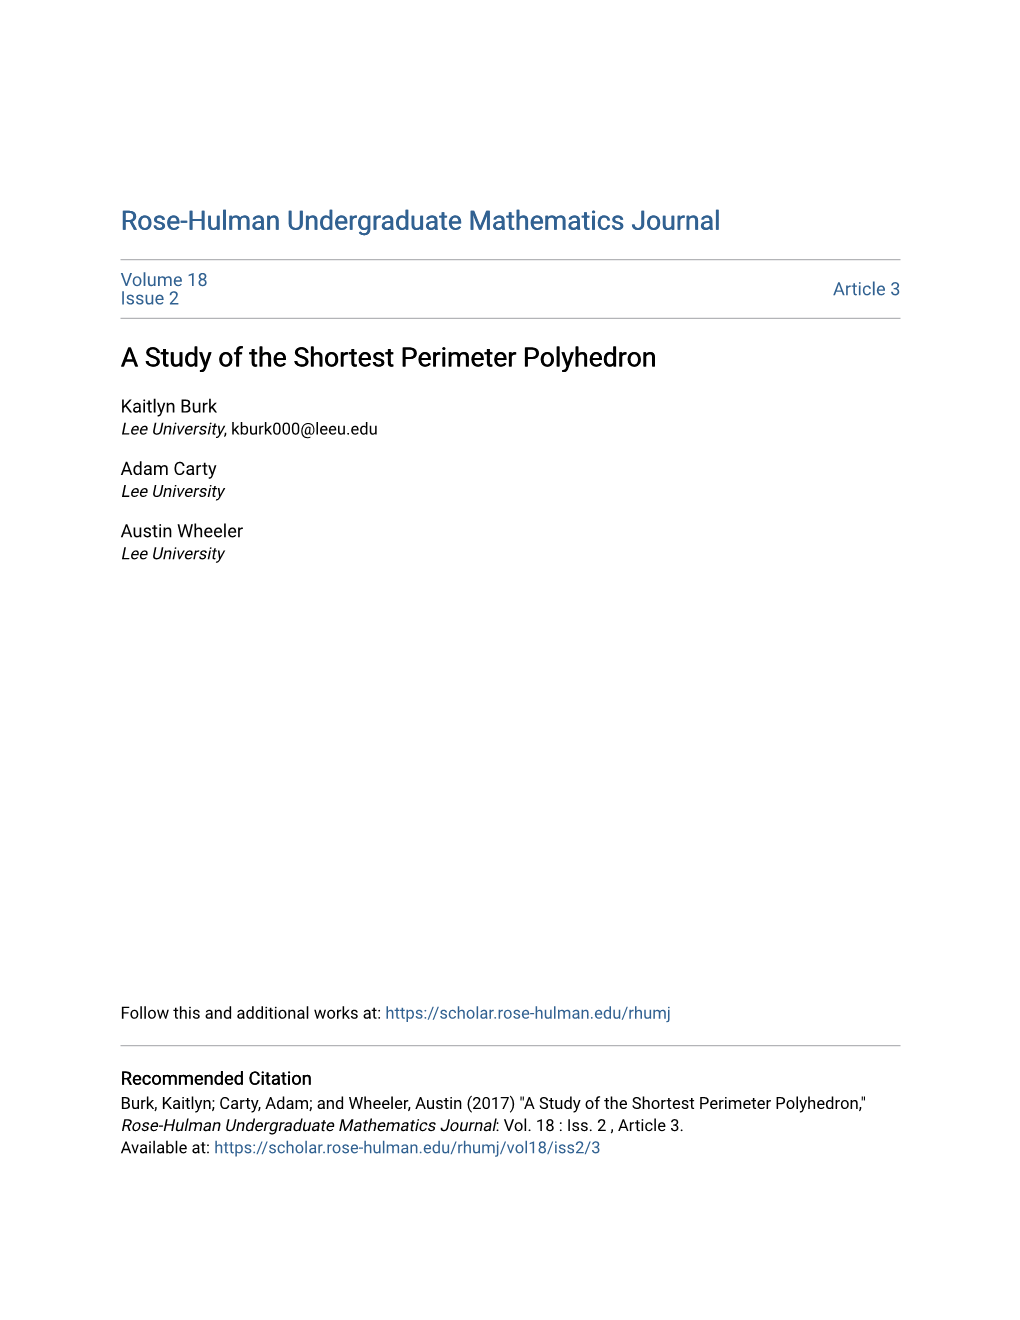 A Study of the Shortest Perimeter Polyhedron